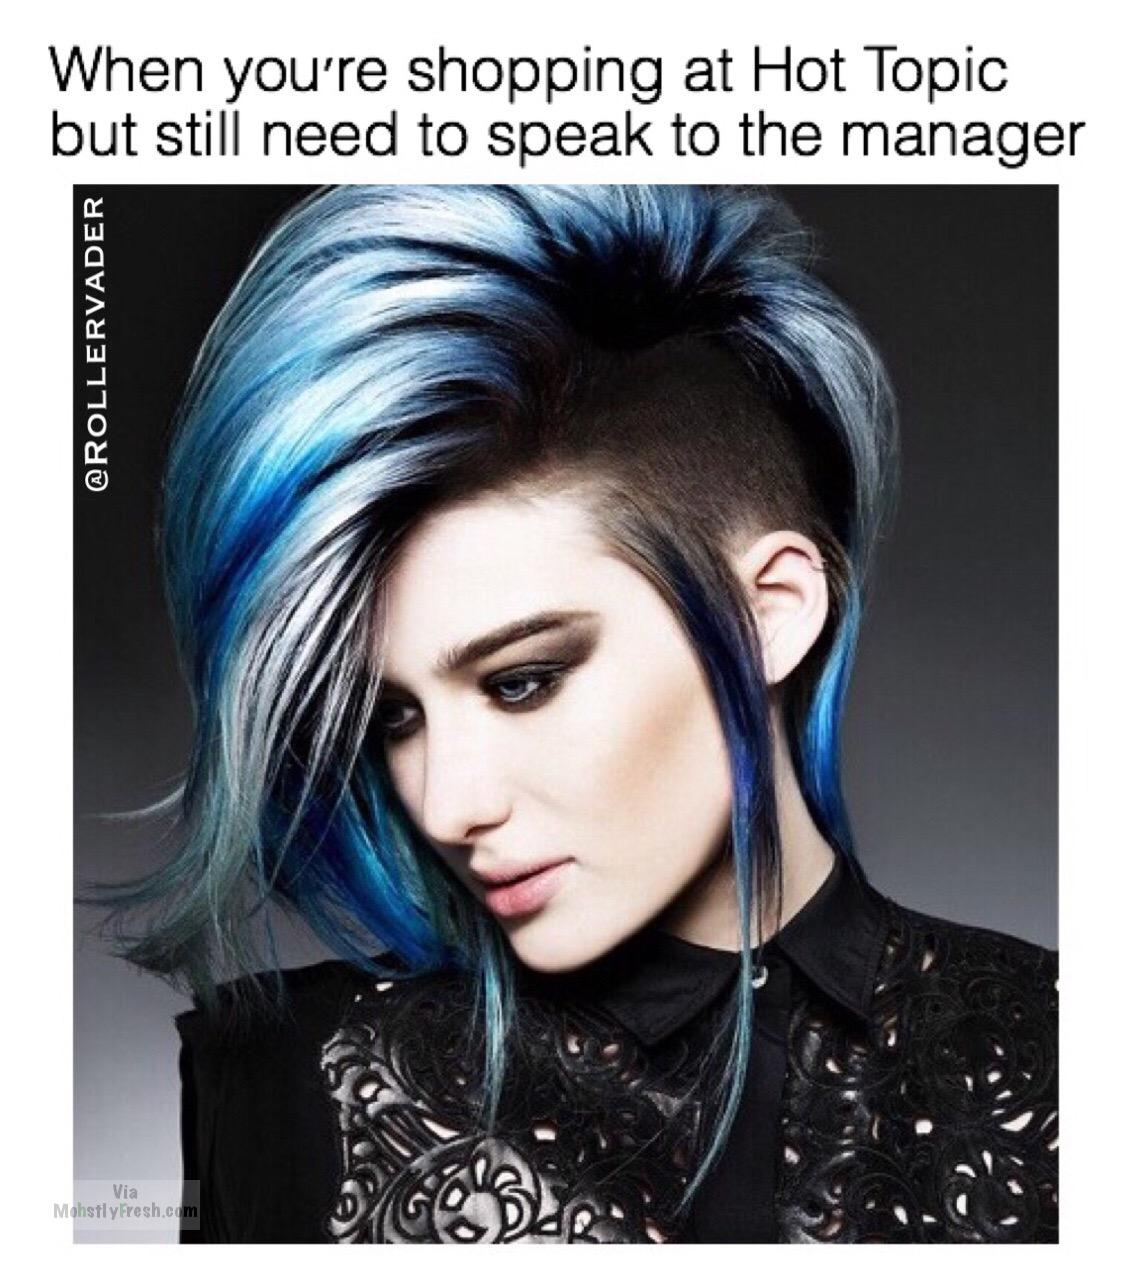 female punk hairstyles - When you're shopping at Hot Topic but still need to speak to the manager Via Mohstly fresh.com